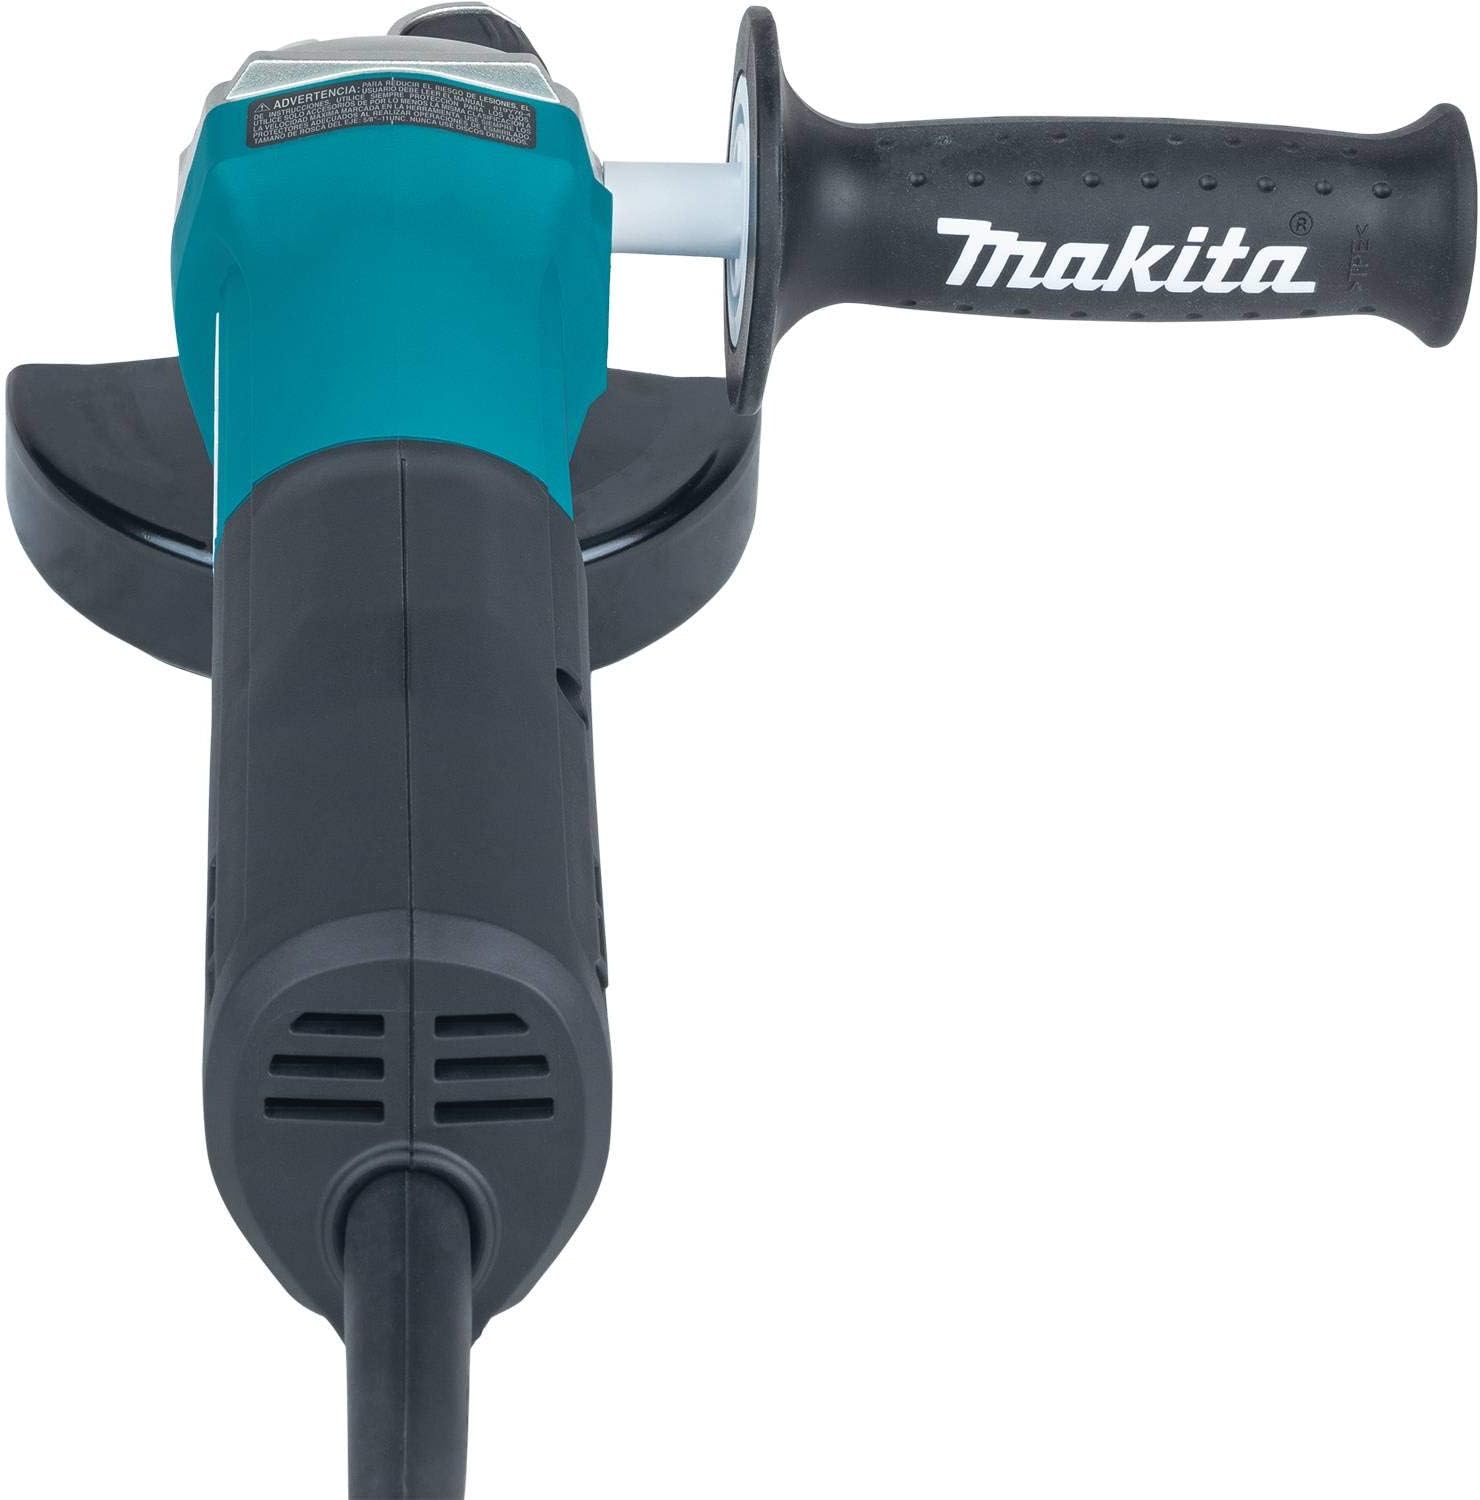 Makita GA4553R 4-1/2 Paddle Switch Angle Grinder, with Non-Removable Guard